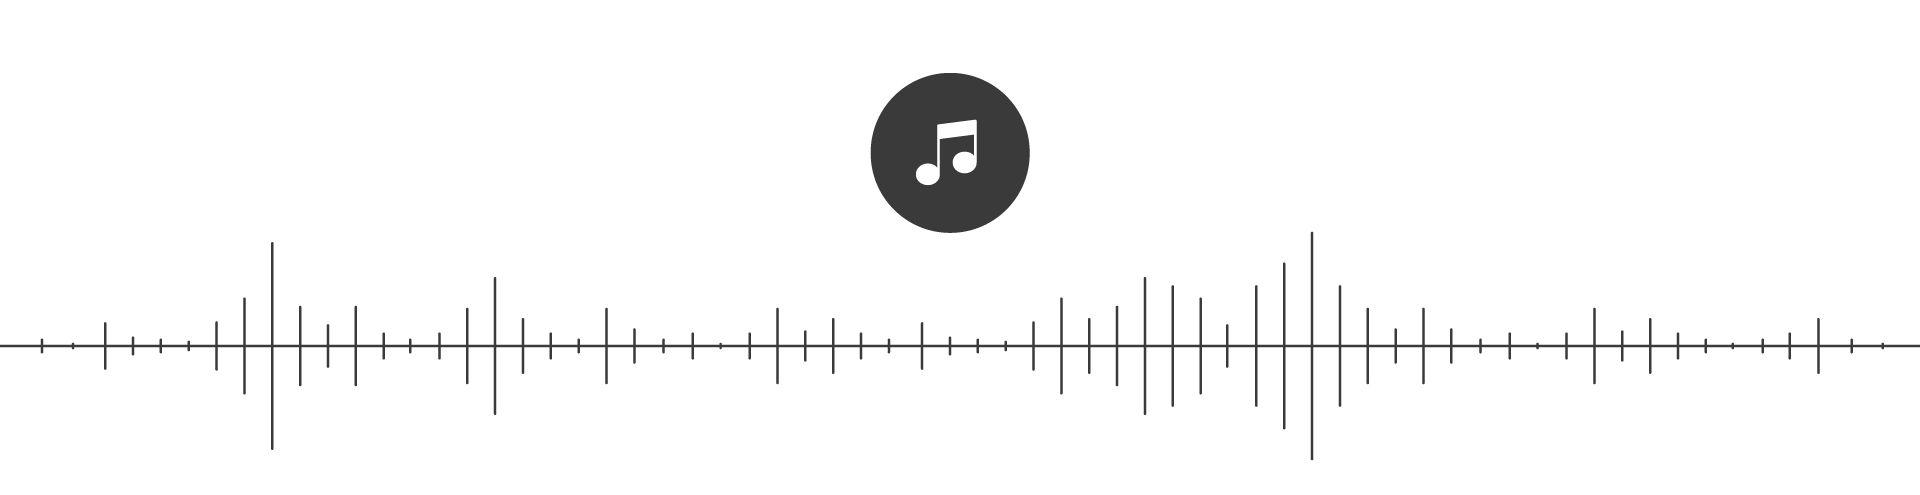 How to Work With Sound In JS: Audio File Streaming (Part 2)